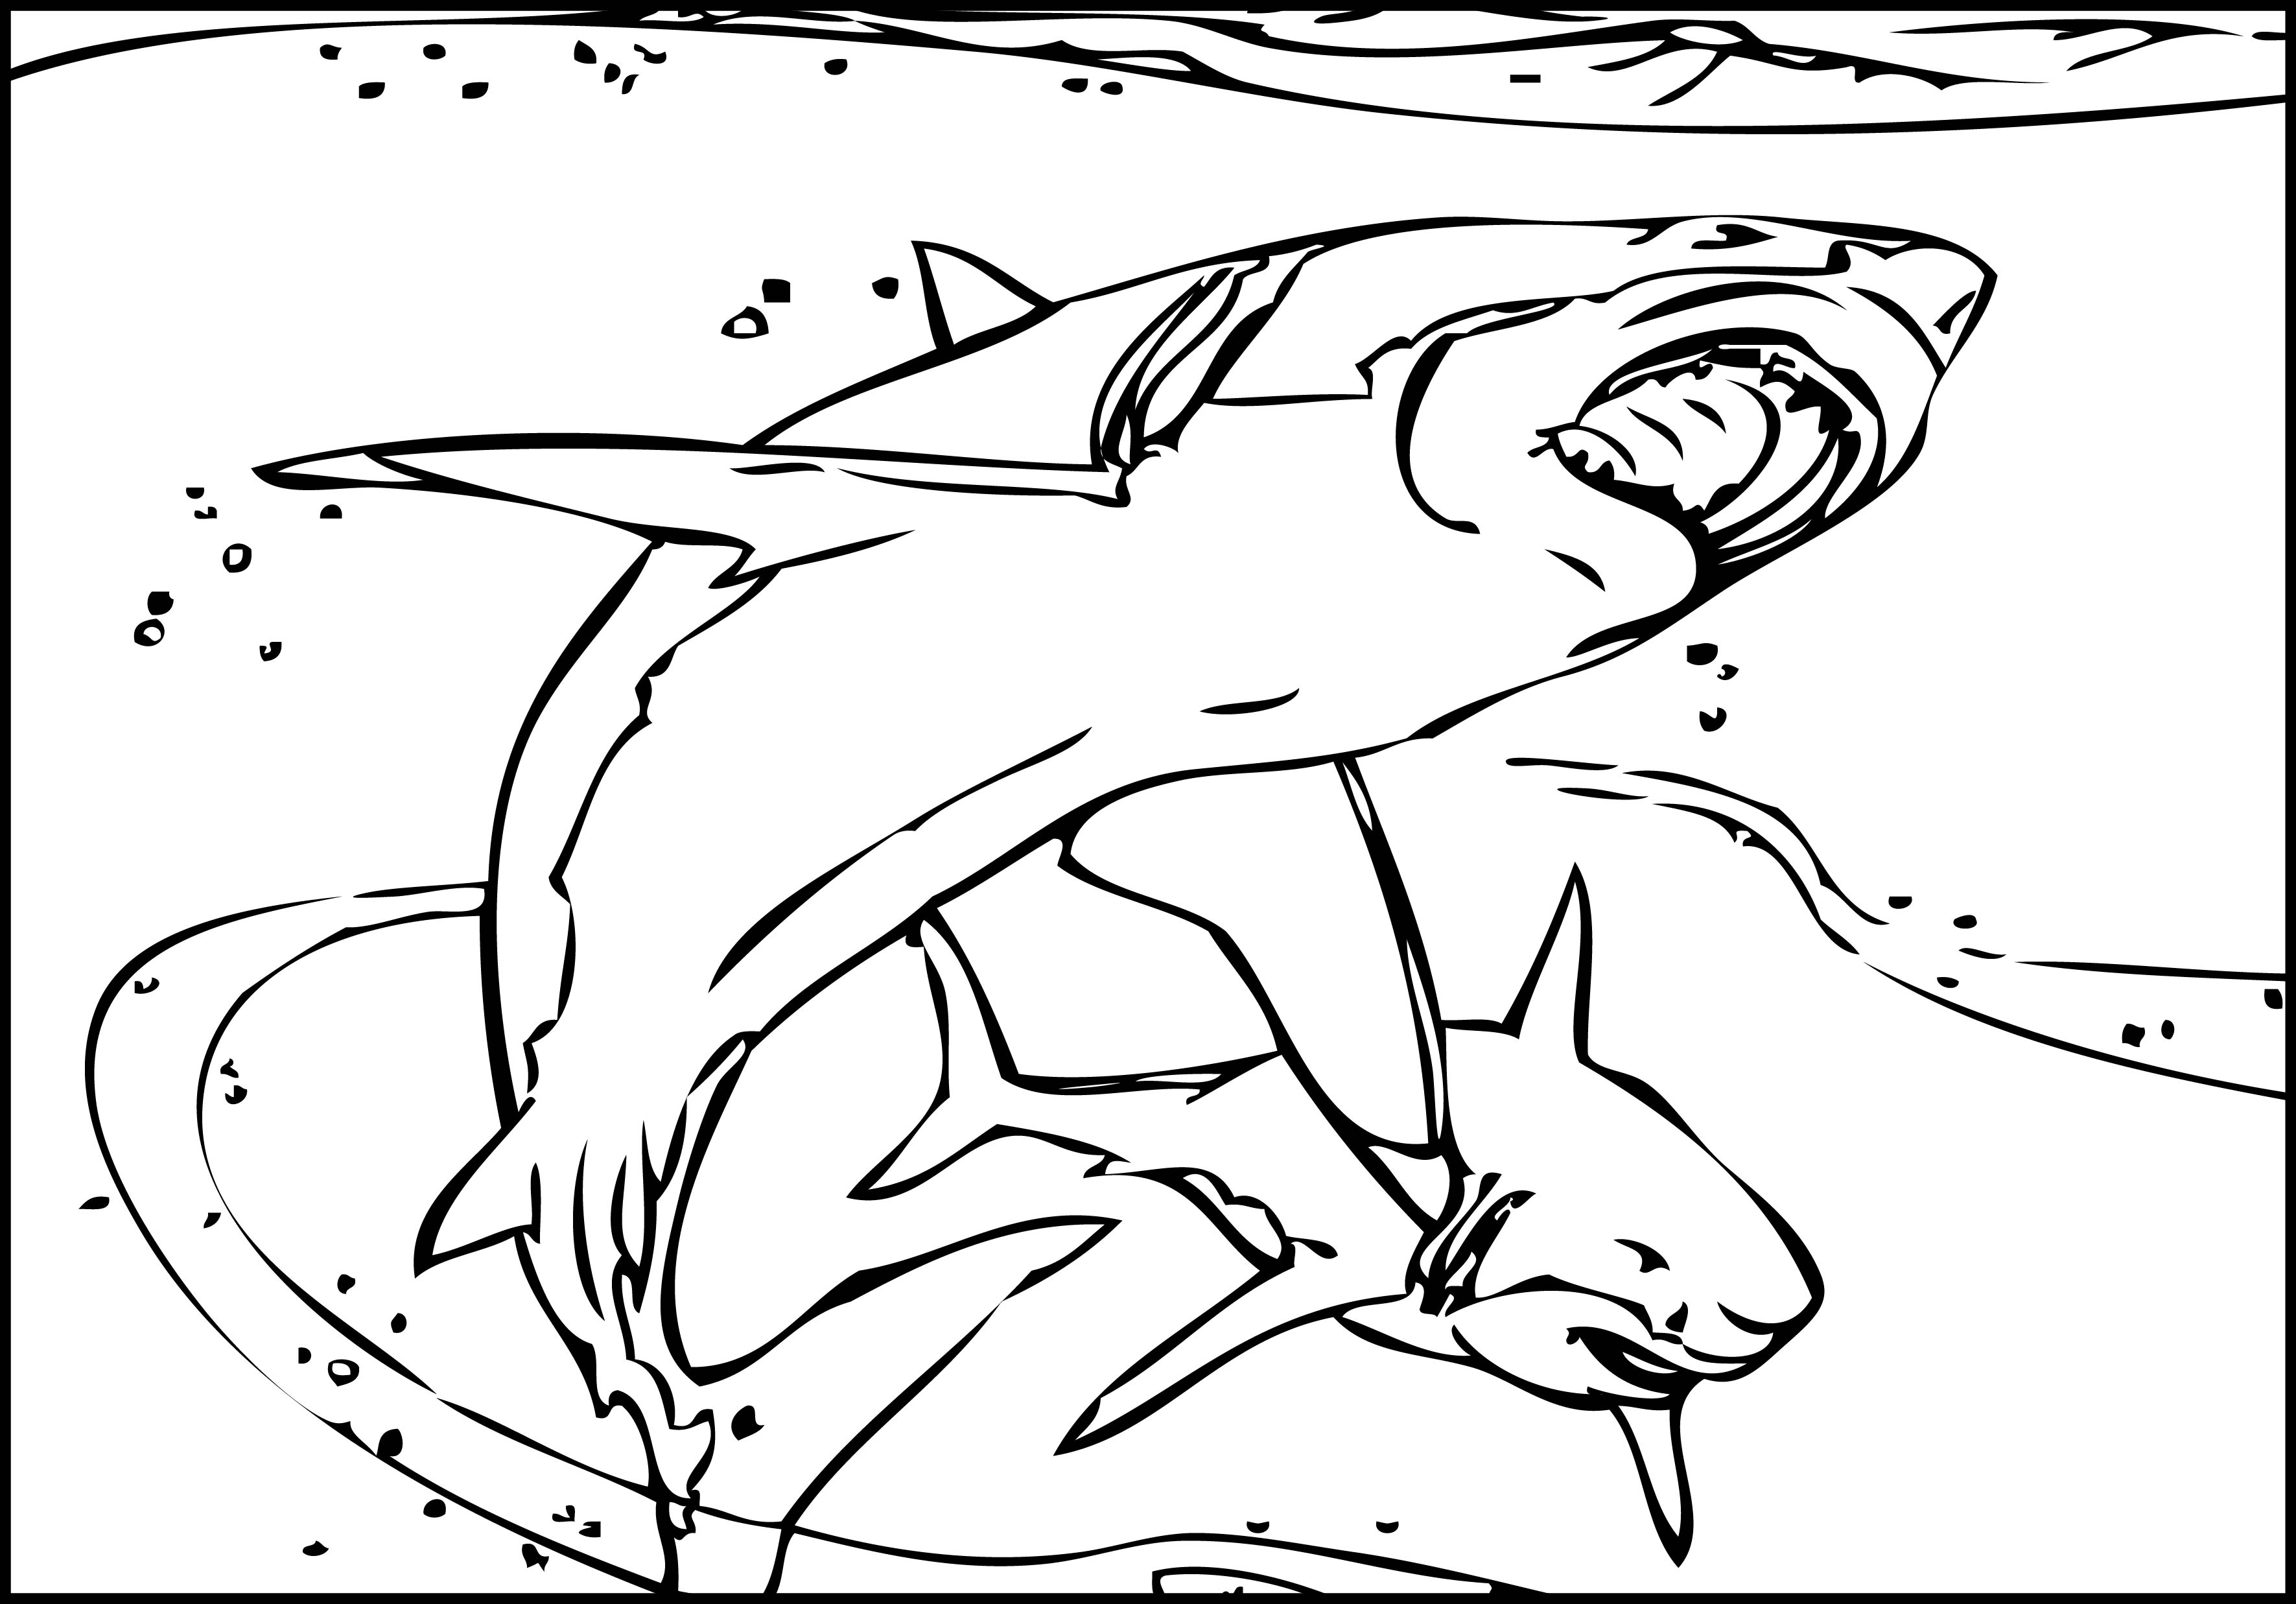 Shark Coloring Pages For Kids at GetColorings.com | Free printable